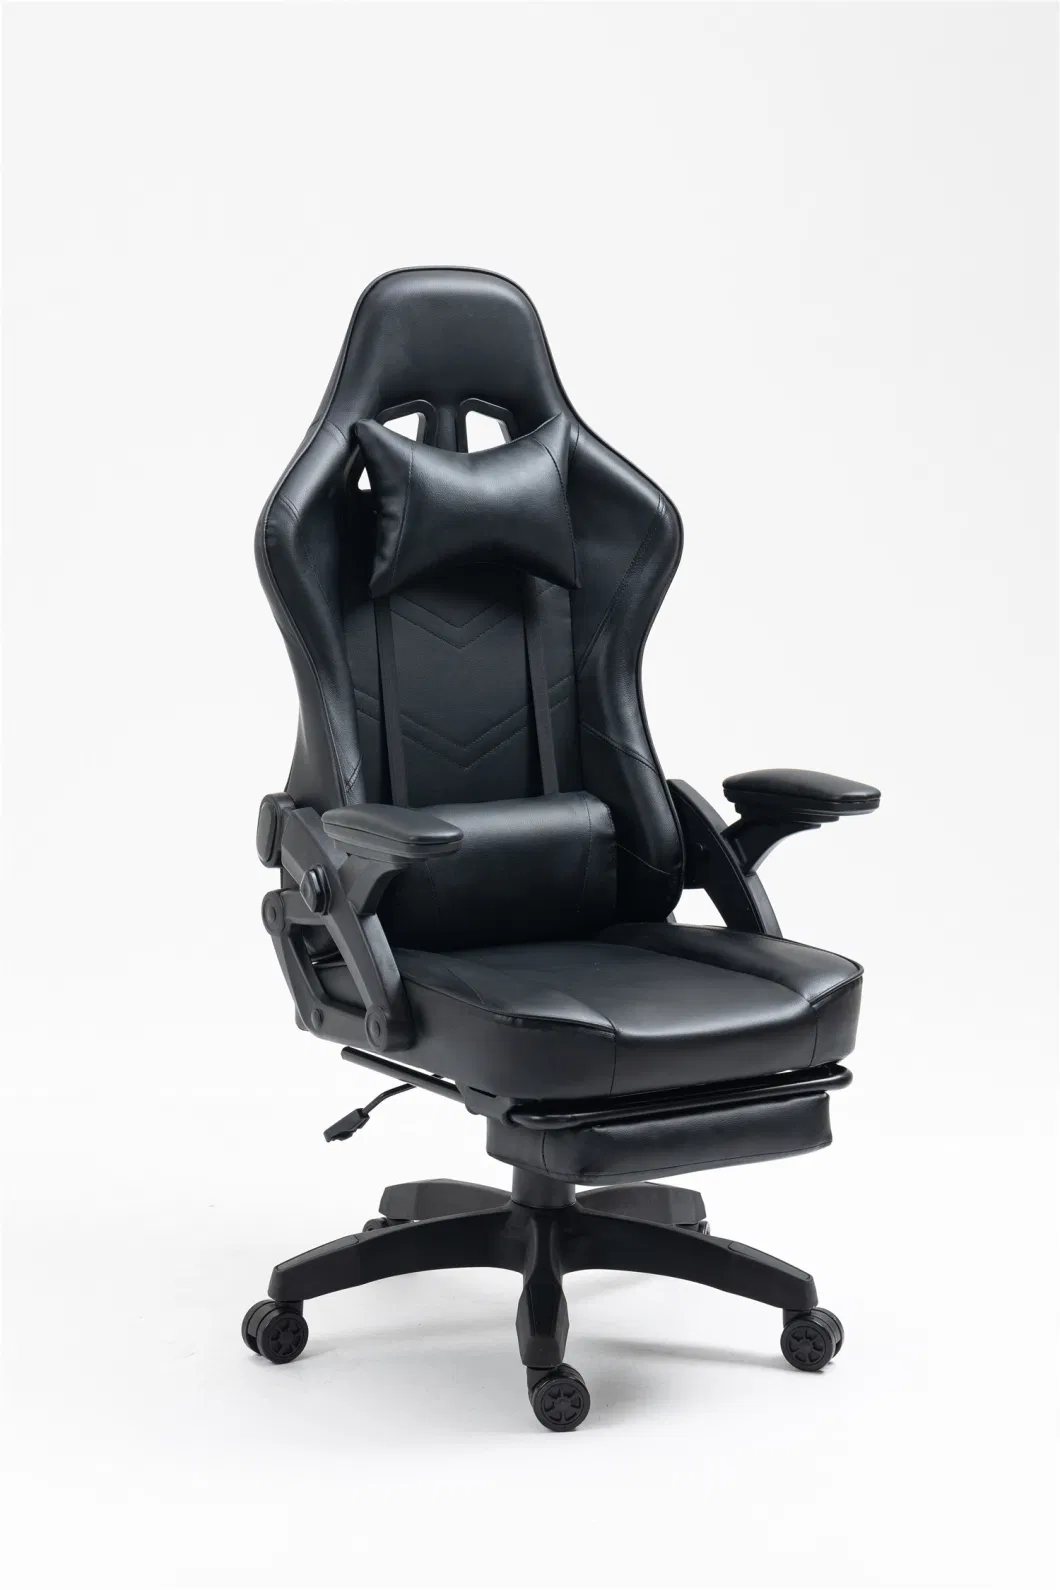 New Patent Gaming Chair Ergonomic Fabric Gaming Chair Home Furniture Chair